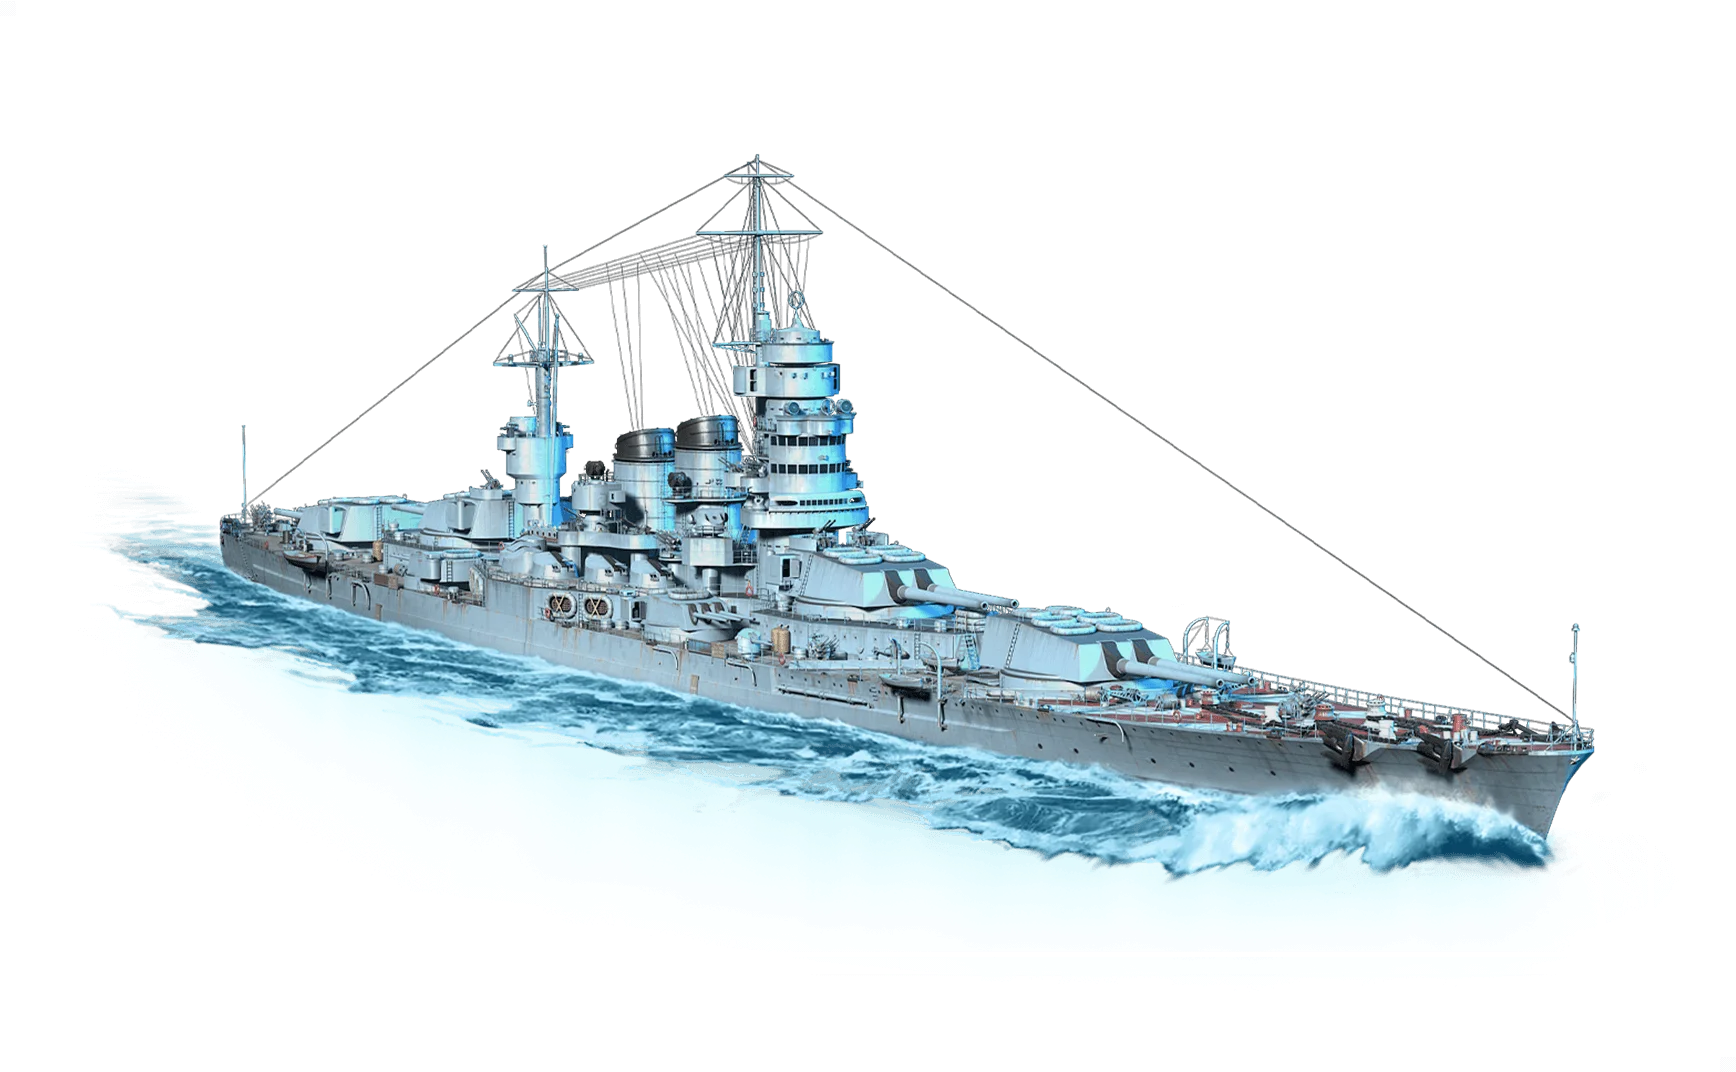 Francesco Caracciolo from World Of Warships: Legends